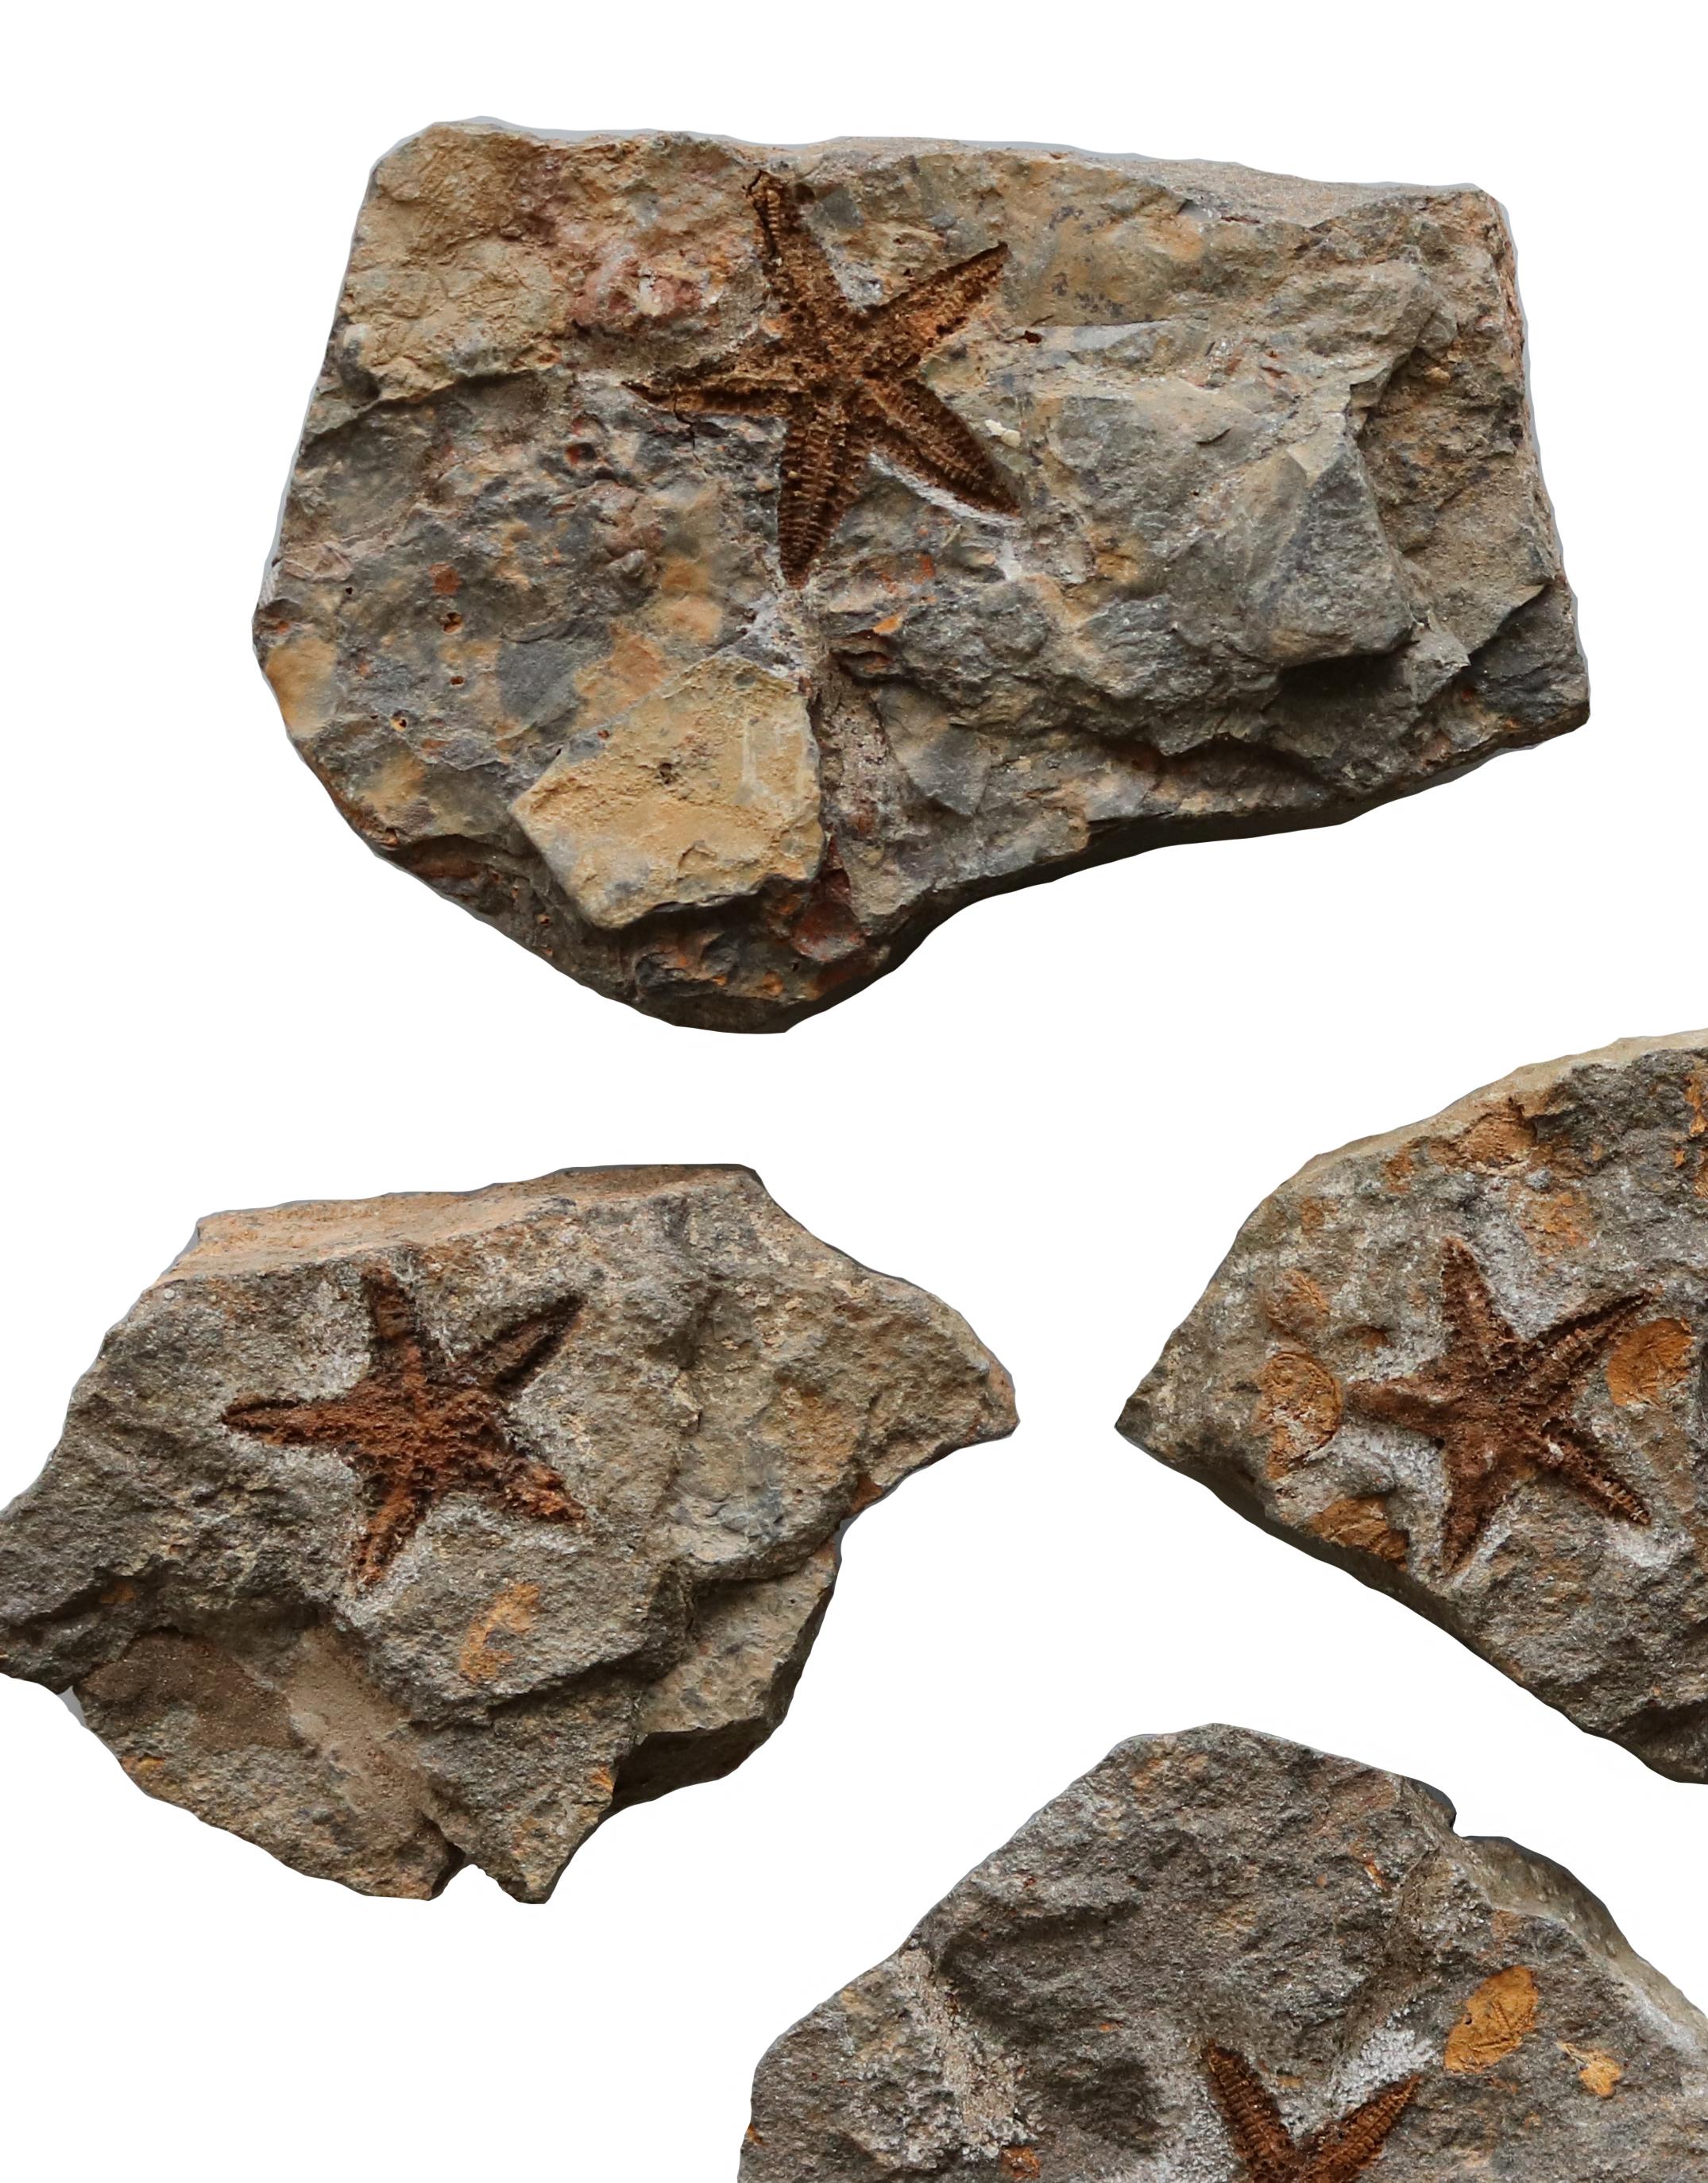 A set of 6 fossilized starfish of different sizes - a equitiste collection to display on a table - wall-mounted or incased.